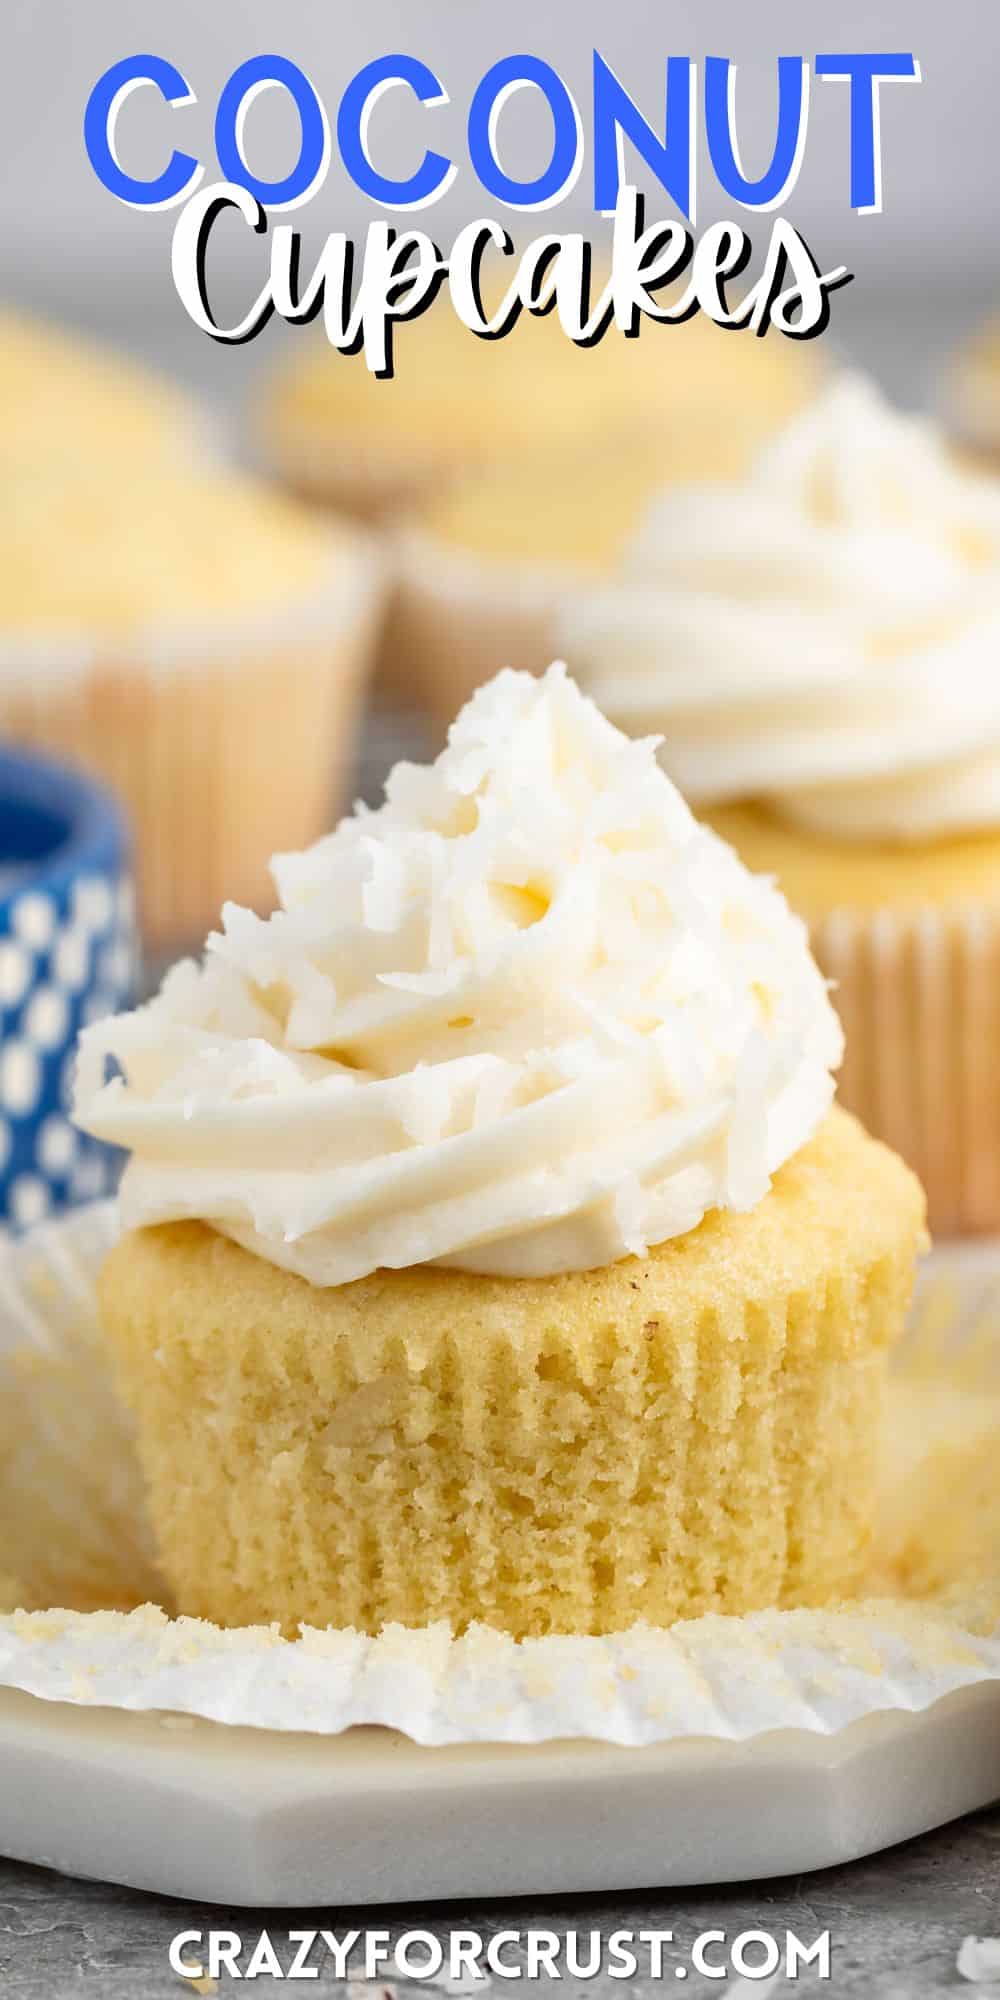 cupcakes with buttercream frosting and coconut shredded on top with words on the image.